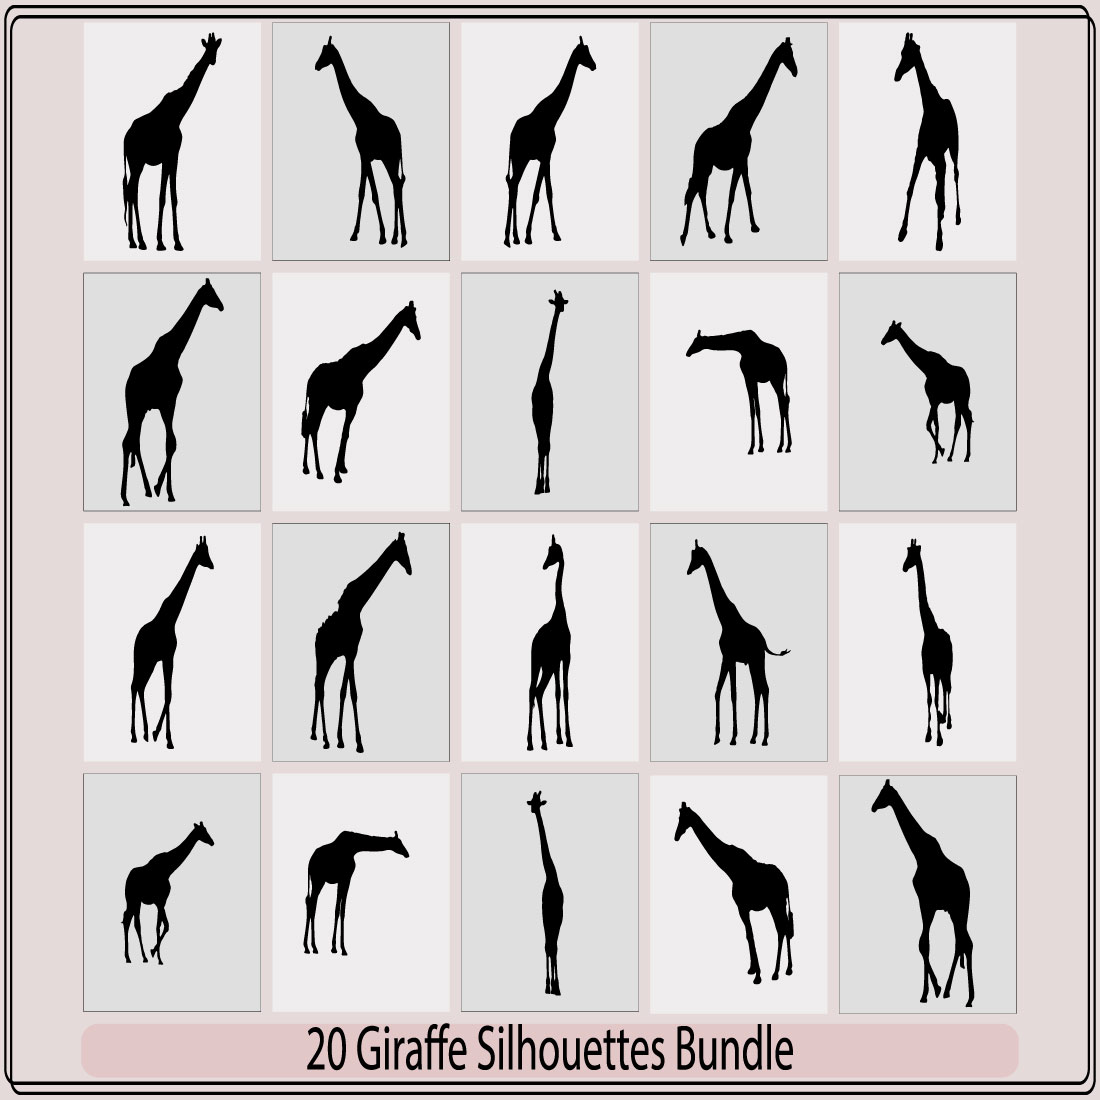 A giraffe animal silhouette set,set of fine giraffe silhouettes - black outlines on white,Giraffe vector preview image.